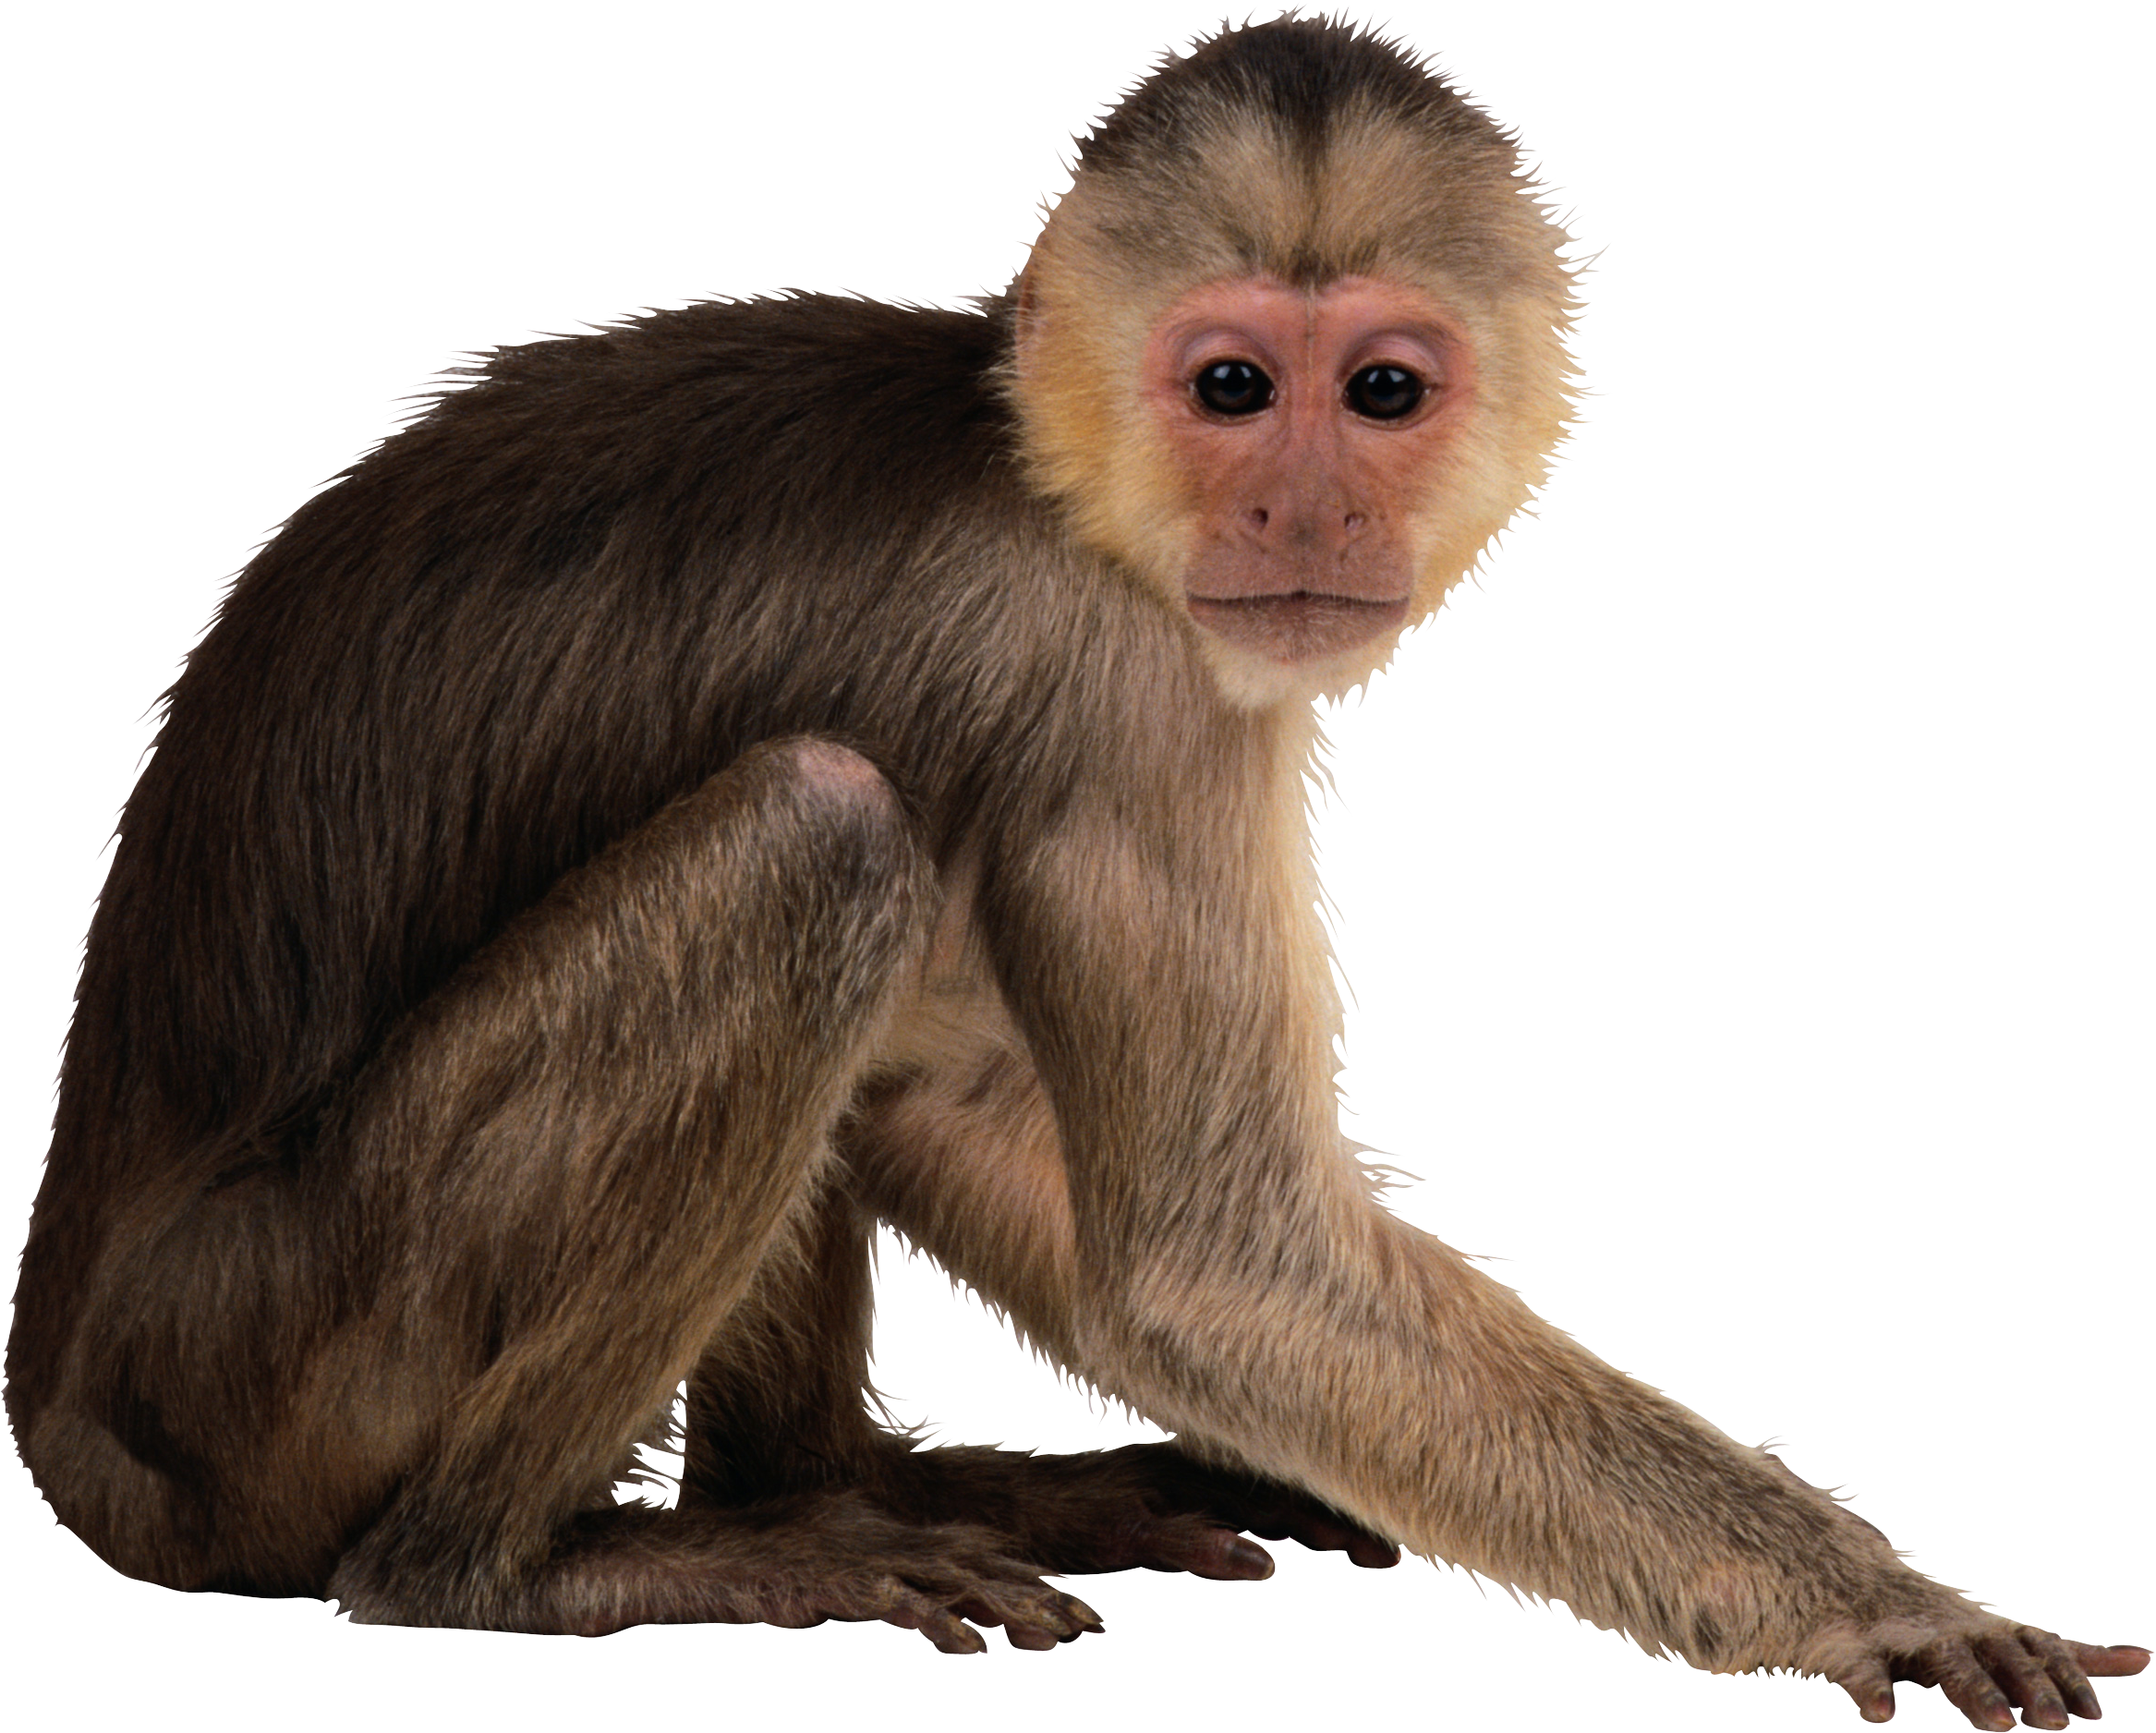 ...Monkey Png, Find more high quality free transparent png clipart images o...